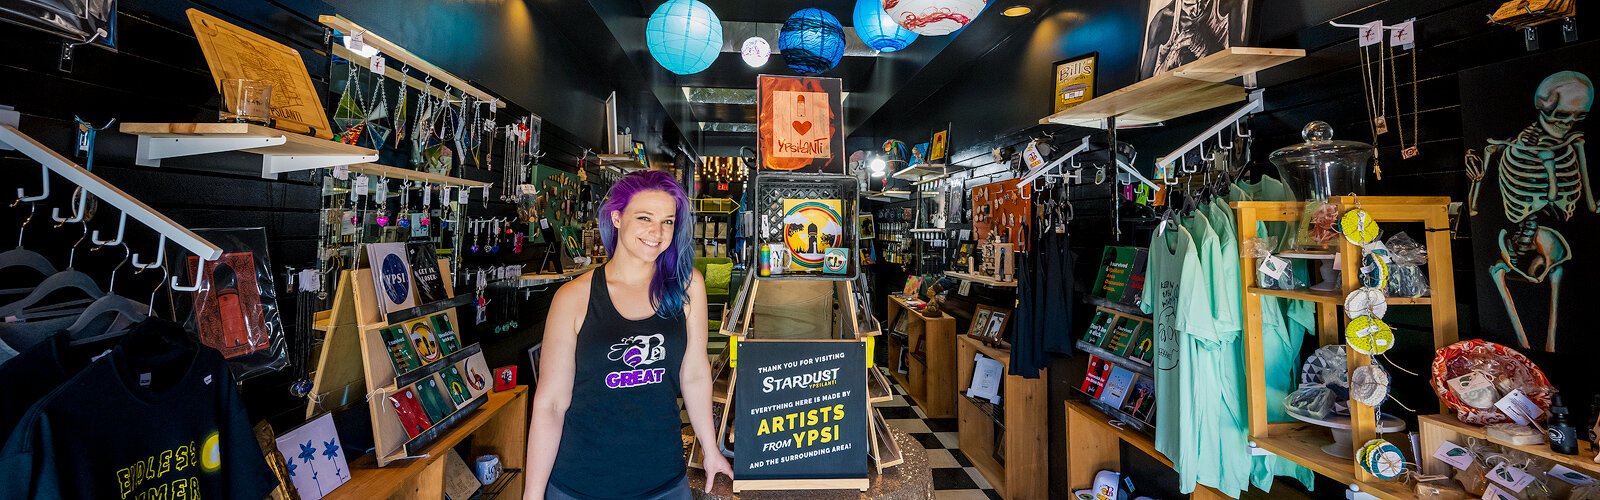 Stardust "galactic gift shop" owner Holly Schoenfield.